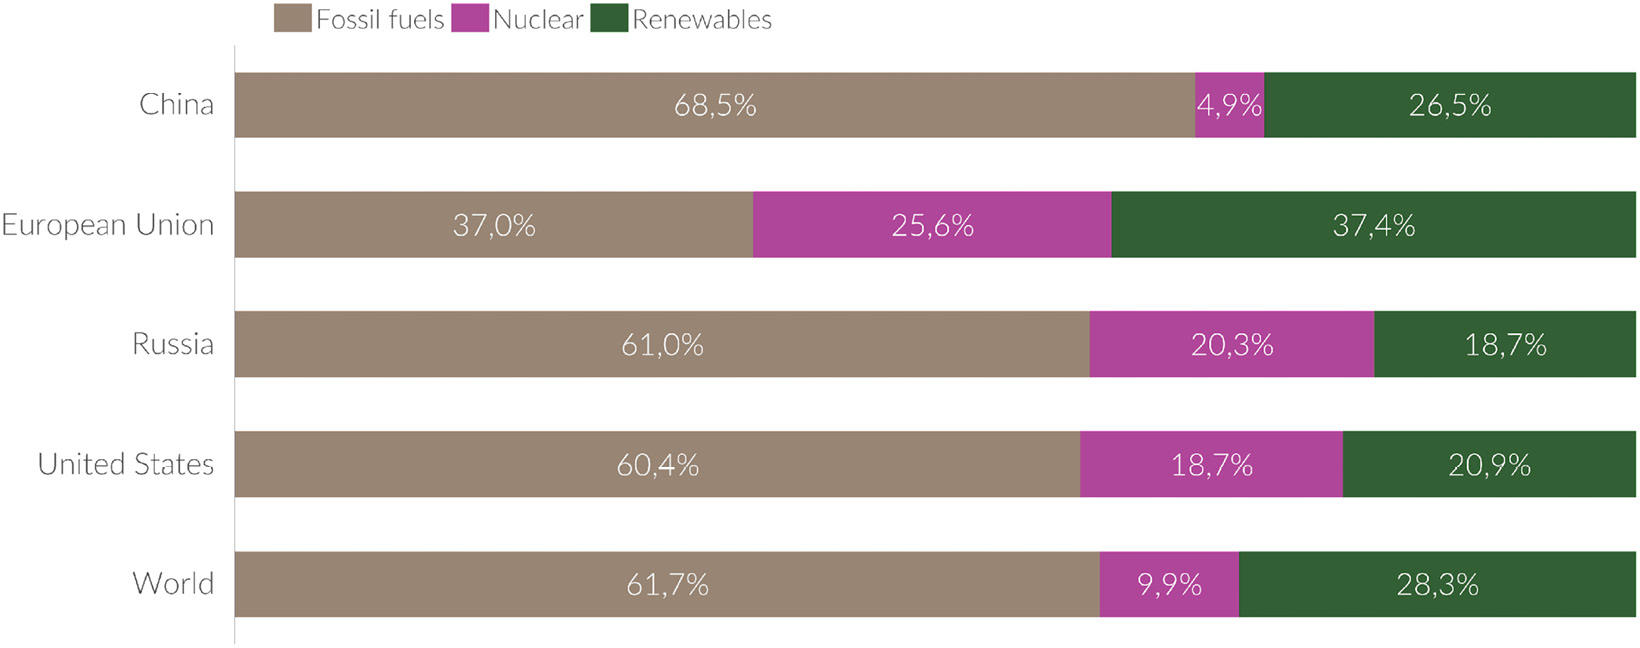 Figure 7.4 – Breakdown of per capita electricity from fossil fuels, nuclear, and renewables
